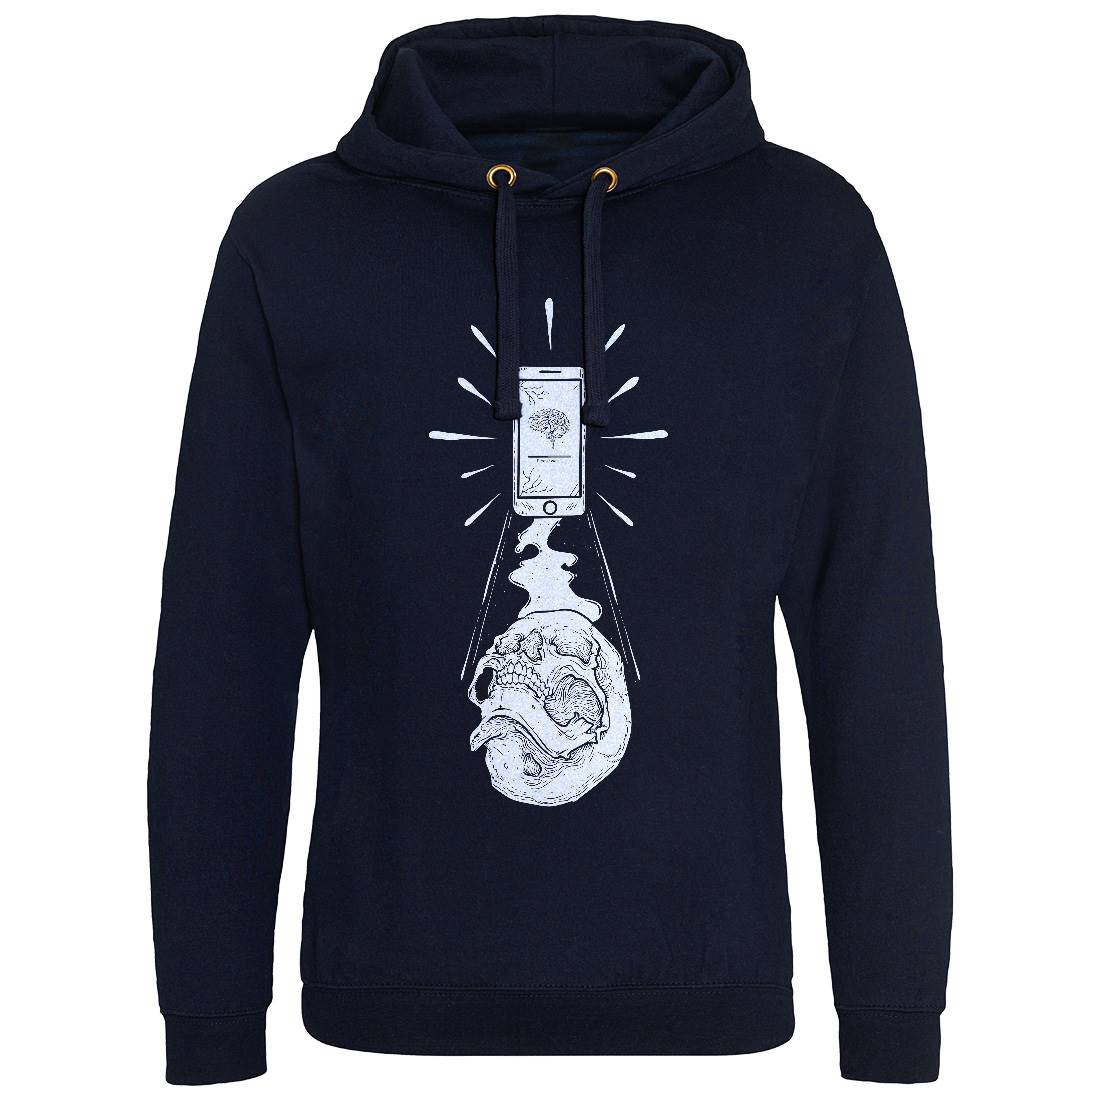 Abduction Mens Hoodie Without Pocket Media D440